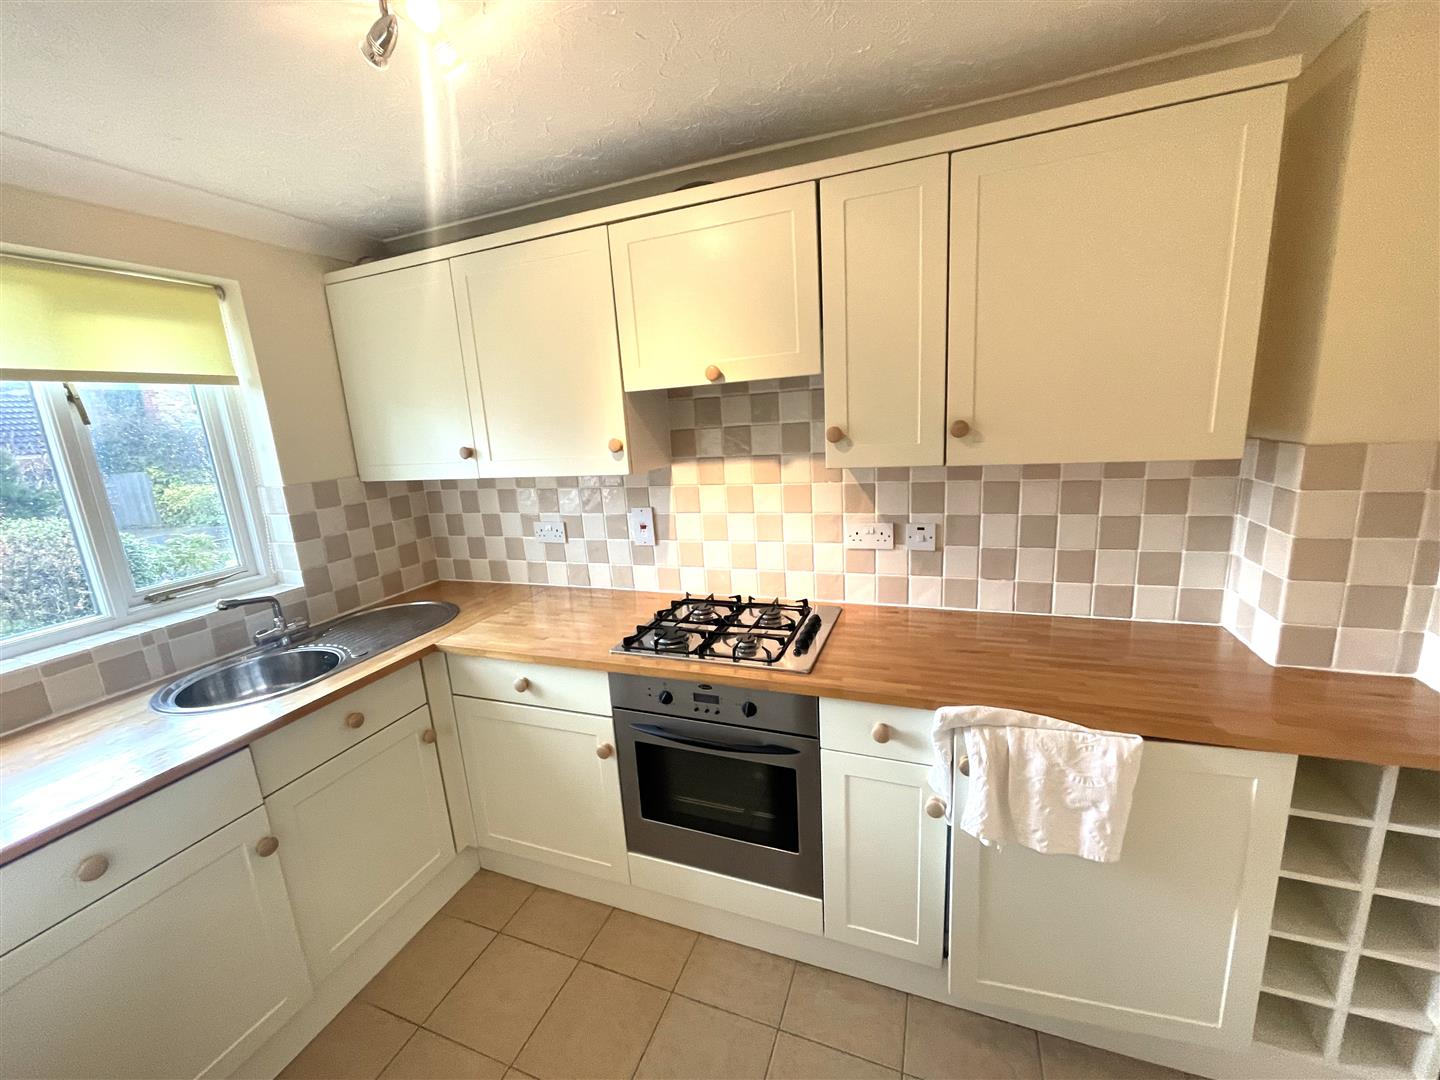 Property in William Judge Close, Tenterden by Weald Property